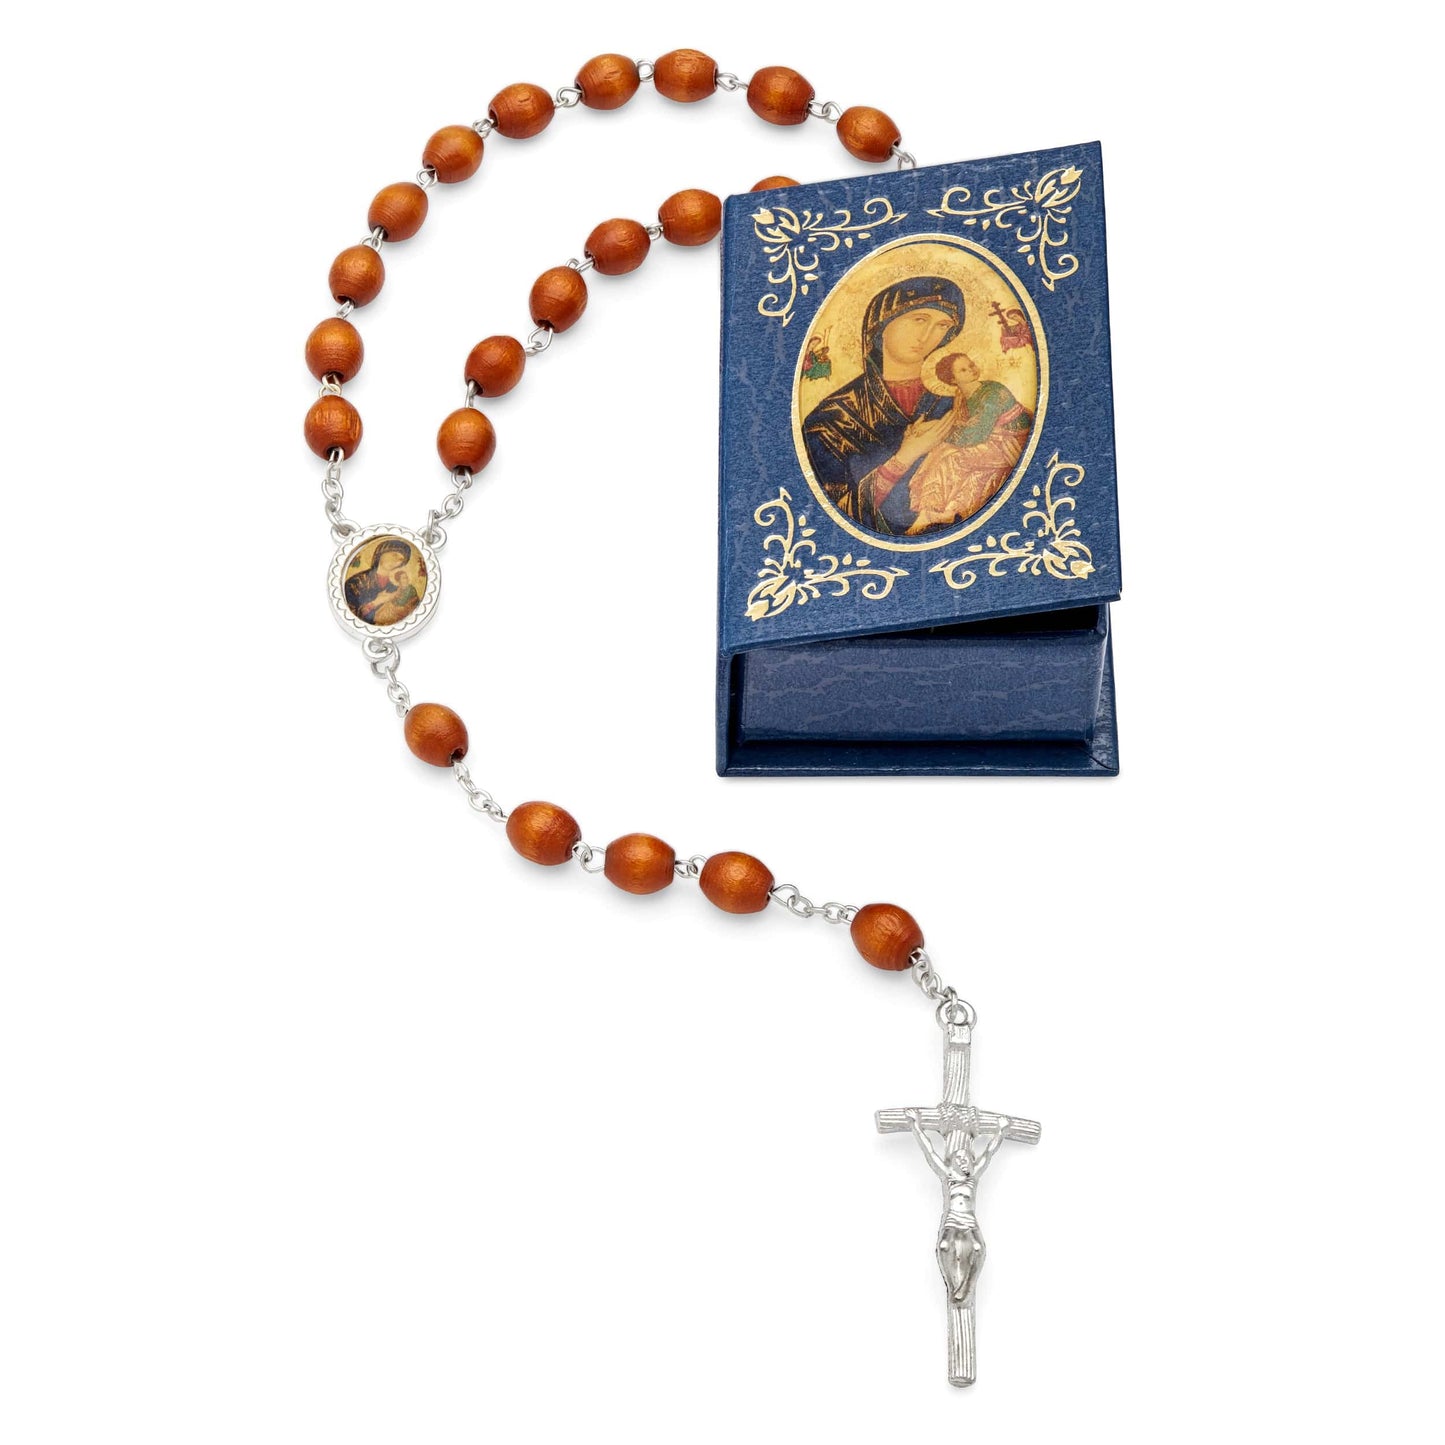 MONDO CATTOLICO Prayer Beads 53 cm (20.90 in) / 7 mm (0.3 in) Our Mother of Perpetual Help Rosary and blue box